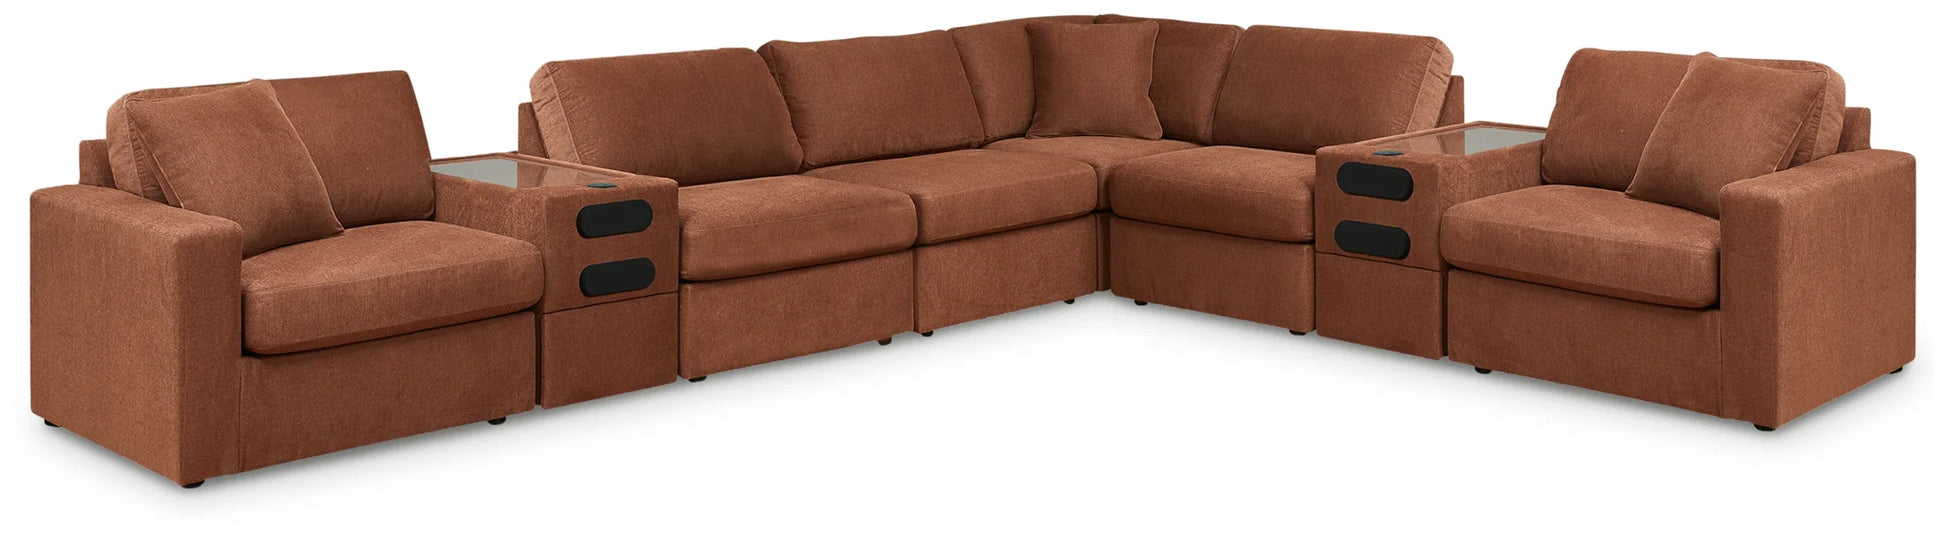 Modmax - Spice - 8-Piece Sectional With 2 Audio System Consoles